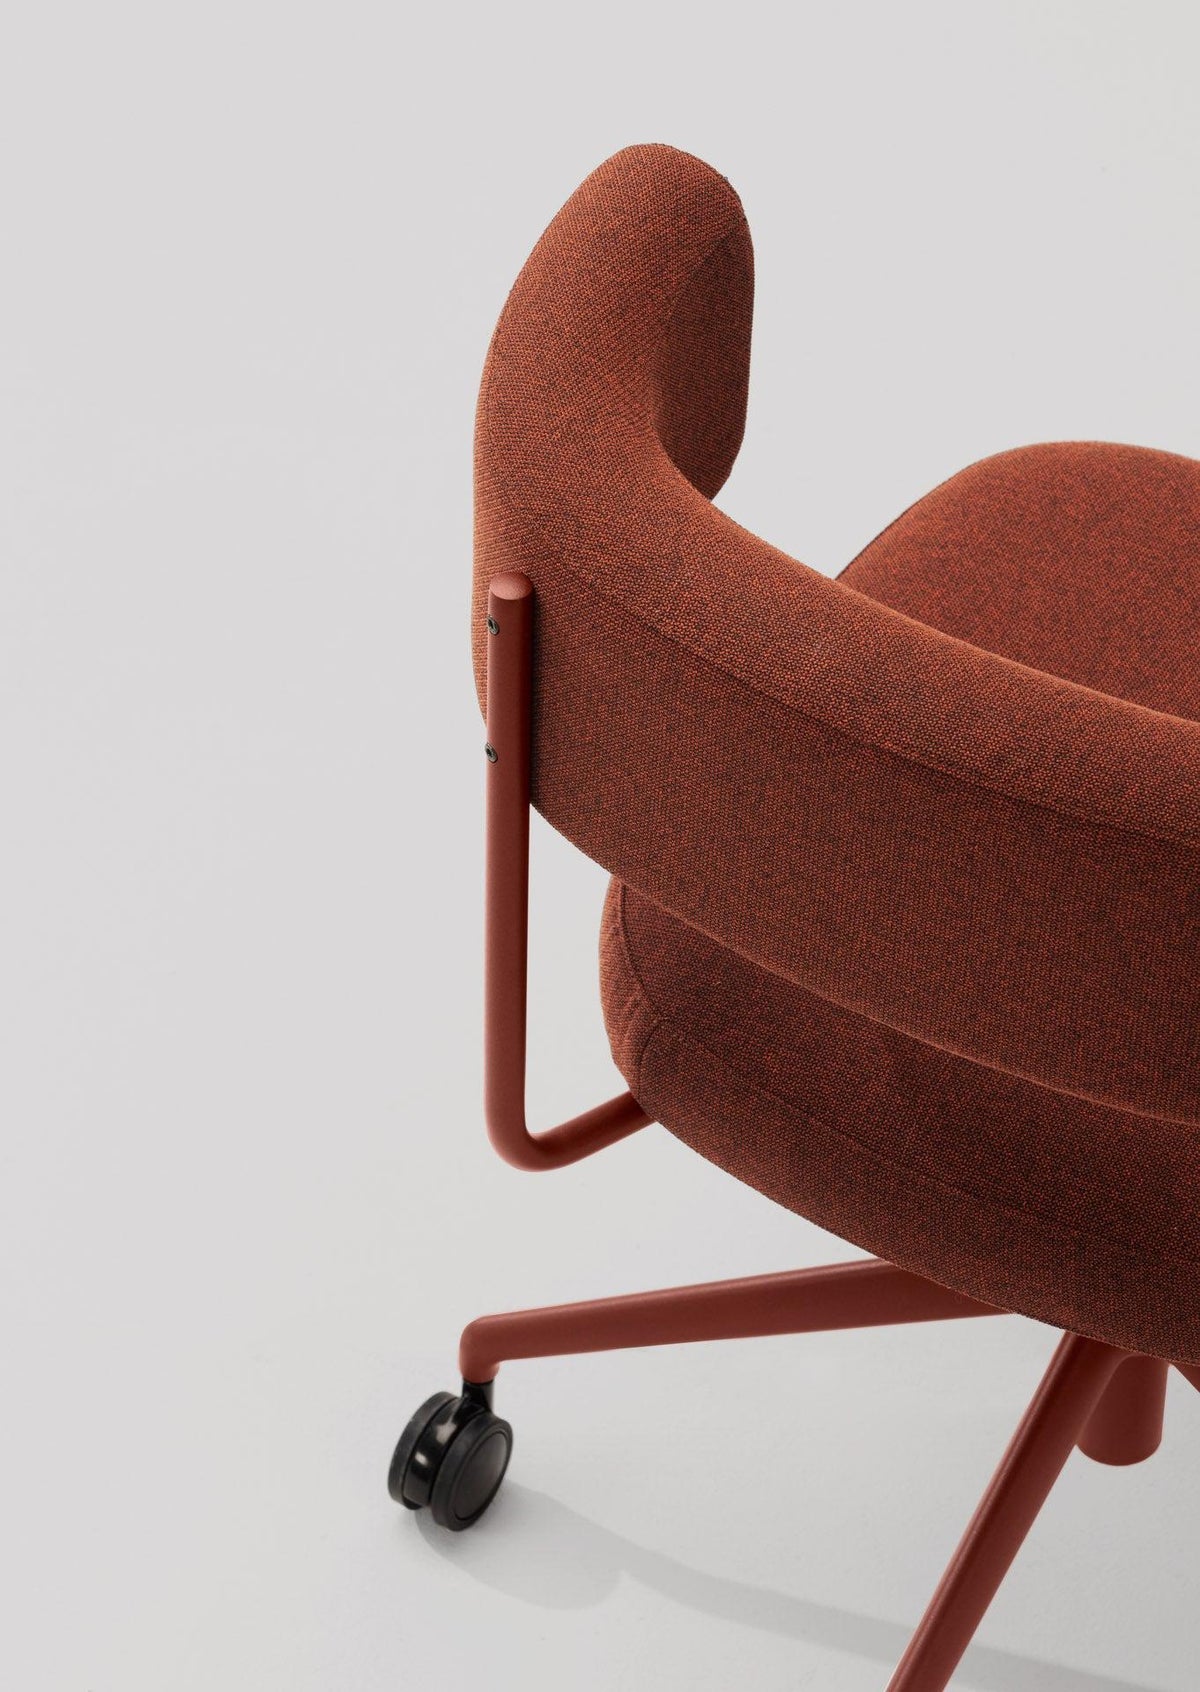 Amelie Armchair-Midj-Contract Furniture Store